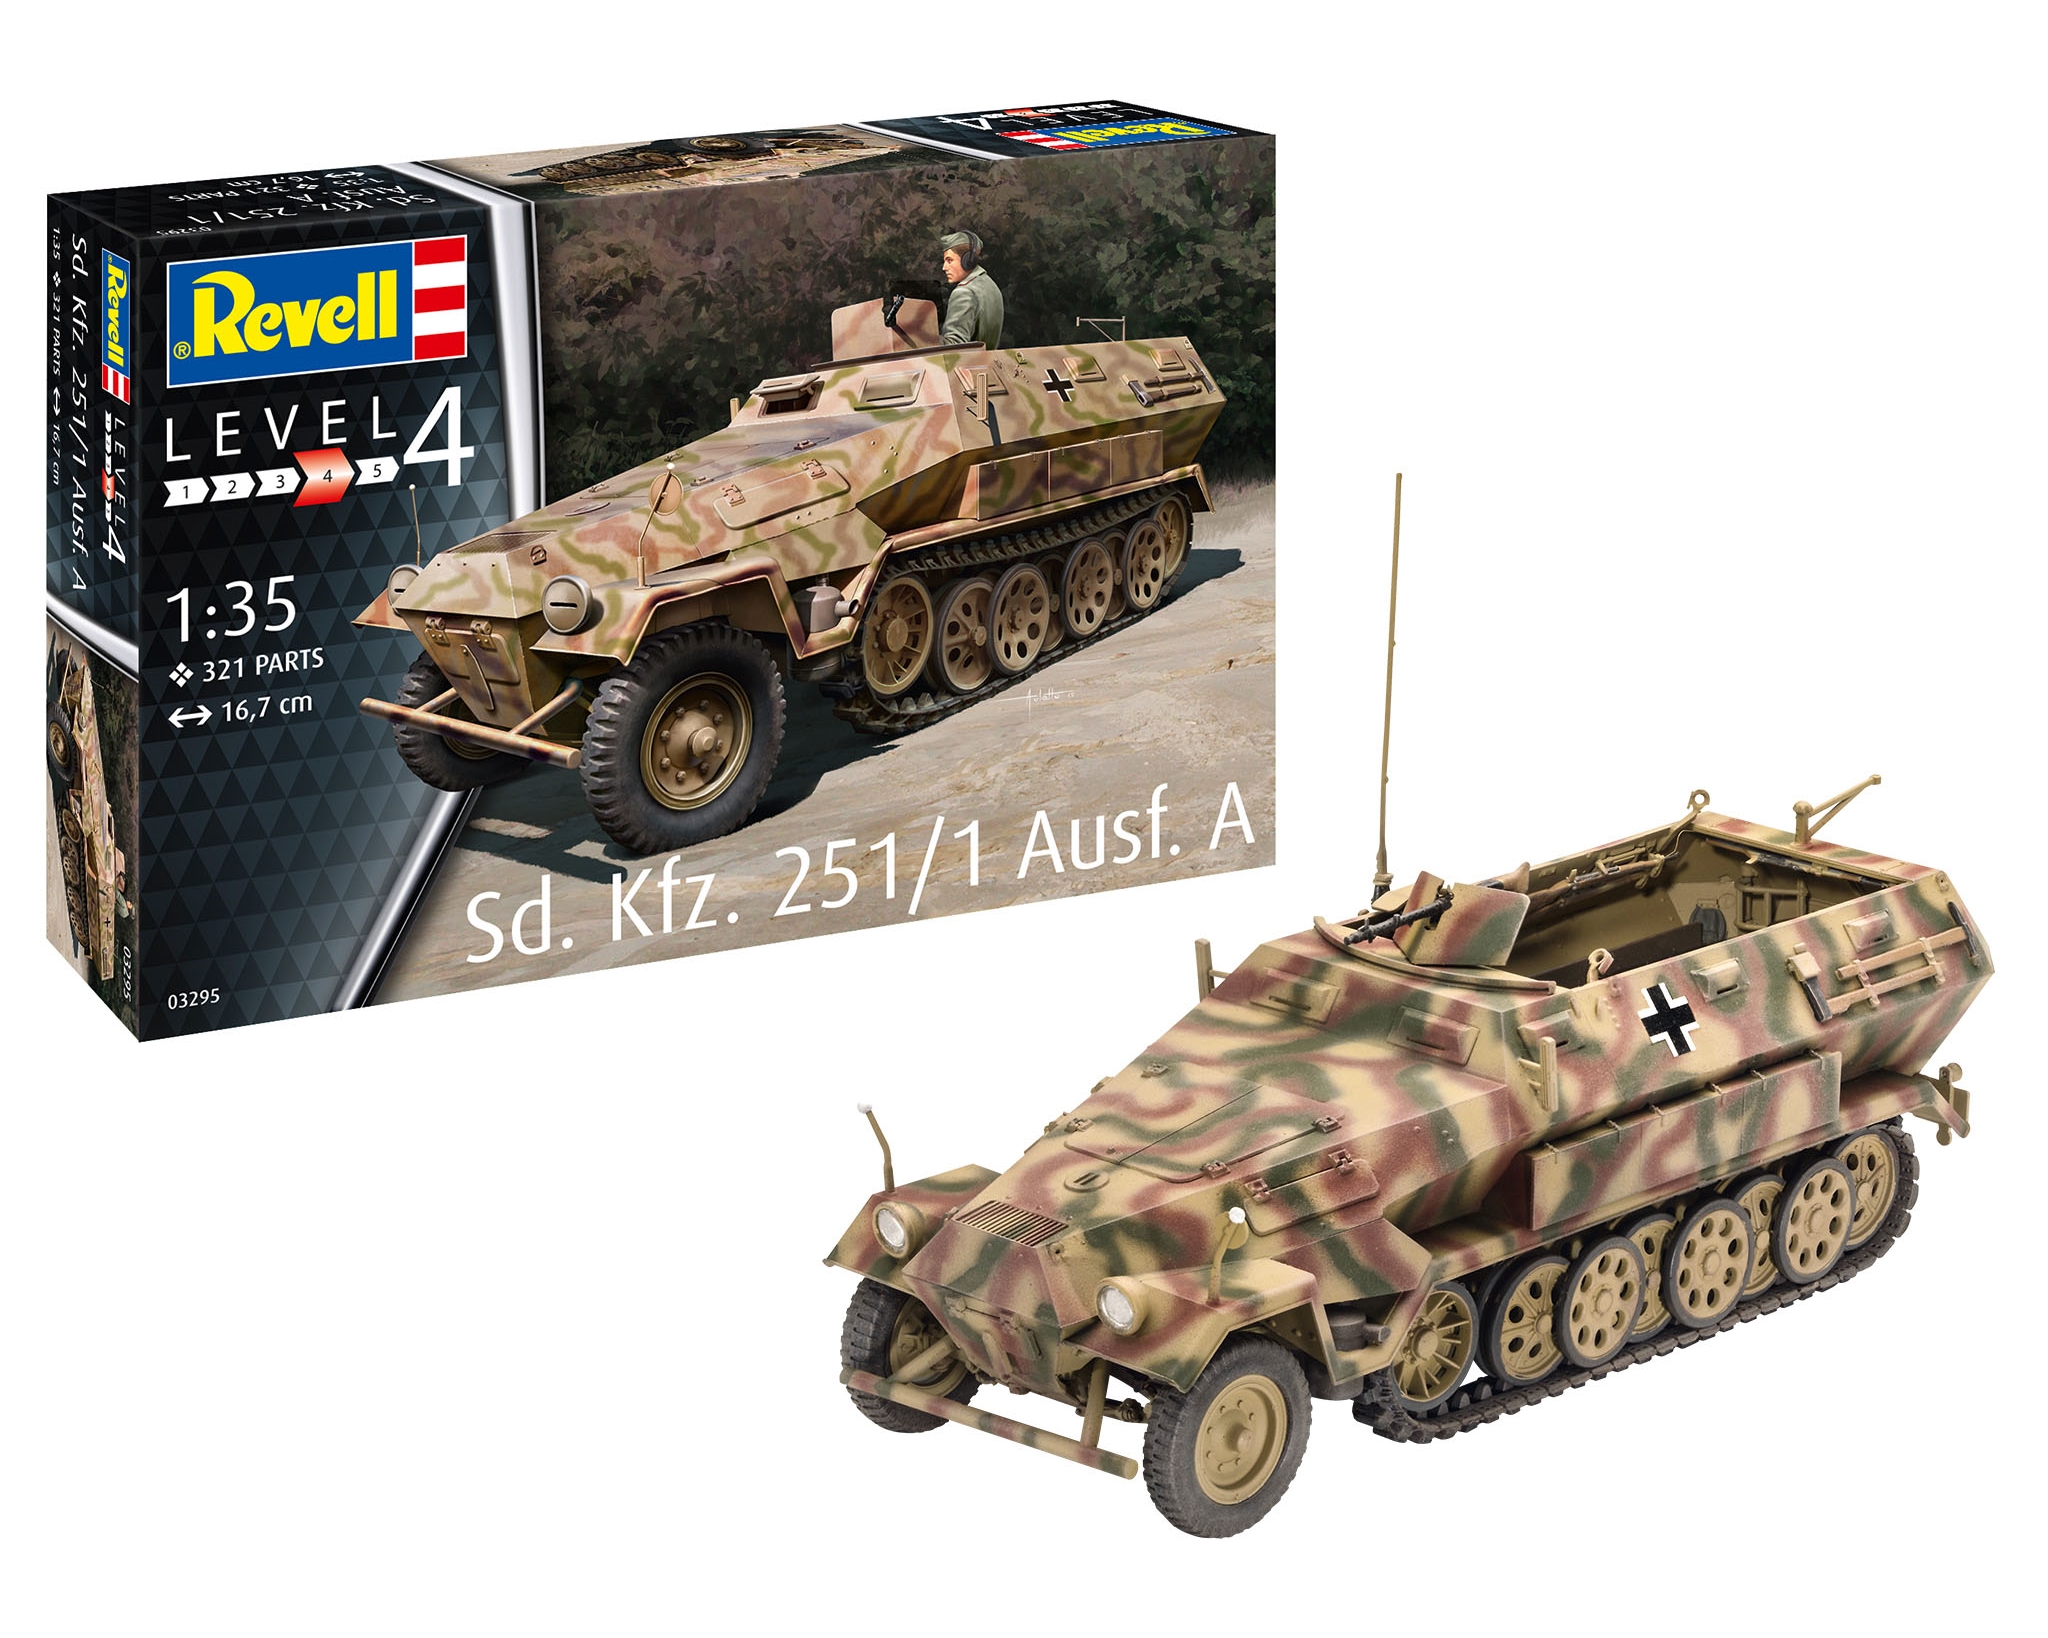 Revell 3295 - SD.KFZ. 251/1 AUSF.A